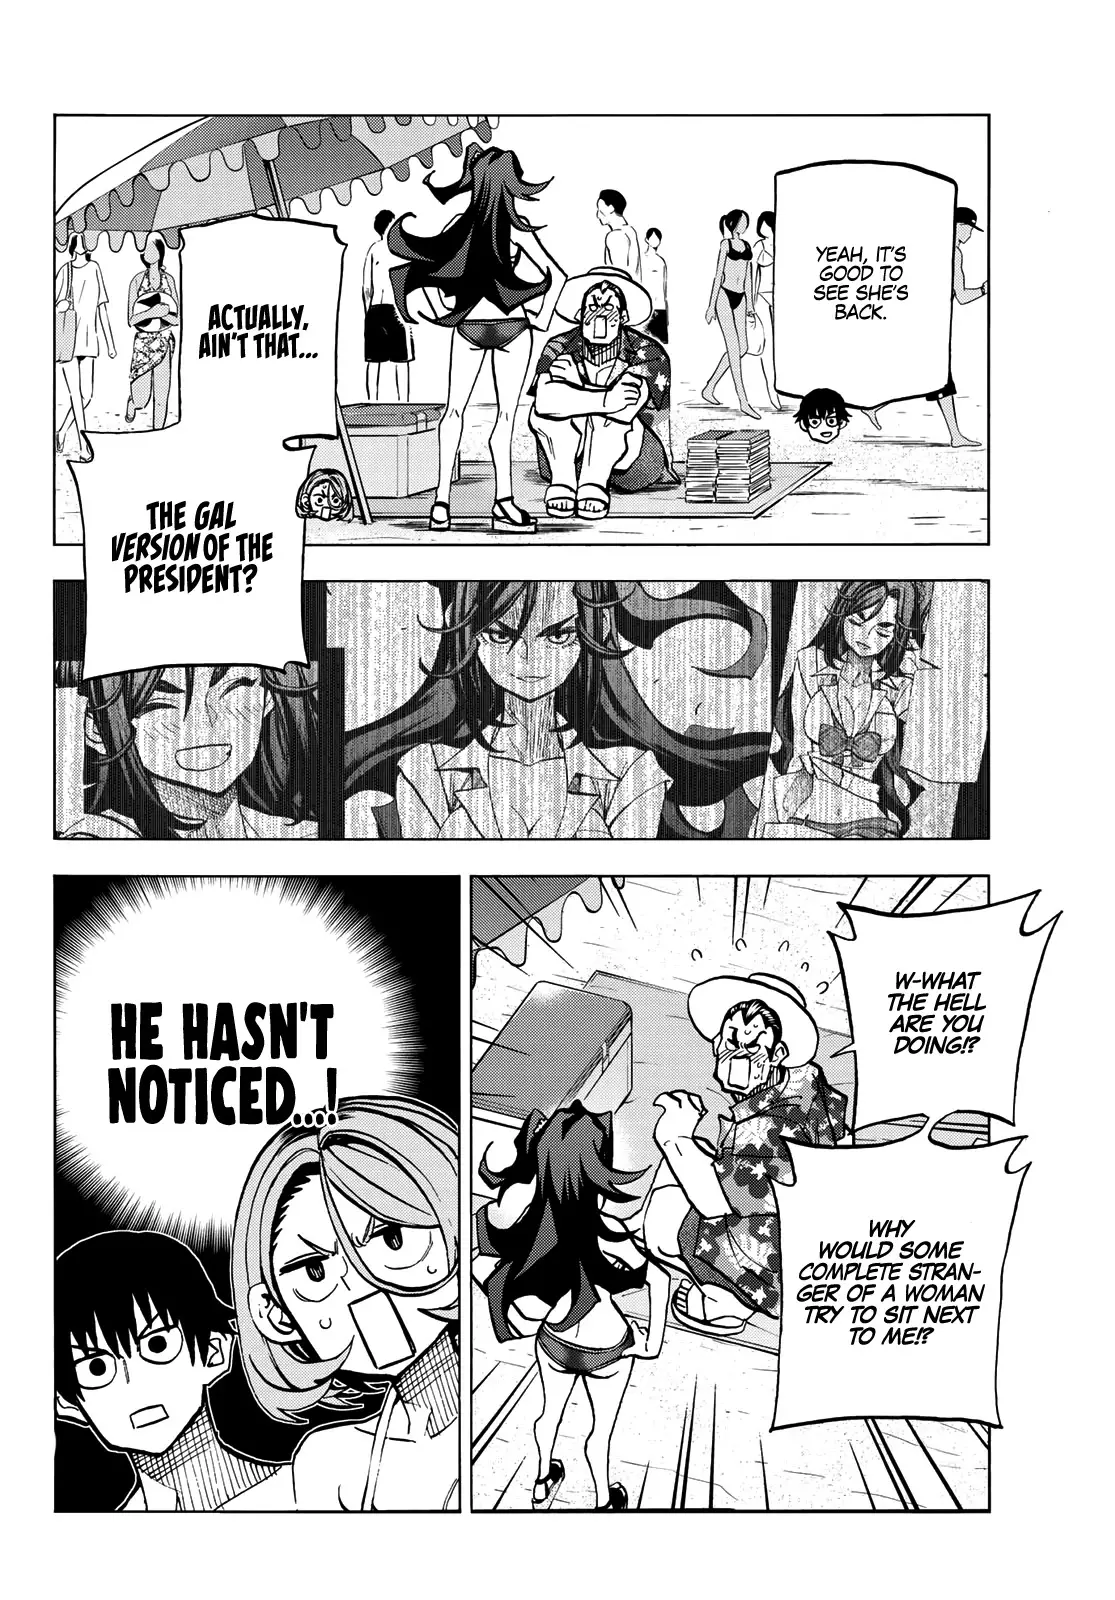 The Story Between A Dumb Prefect And A High School Girl With An Inappropriate Skirt Length - 21 page 3